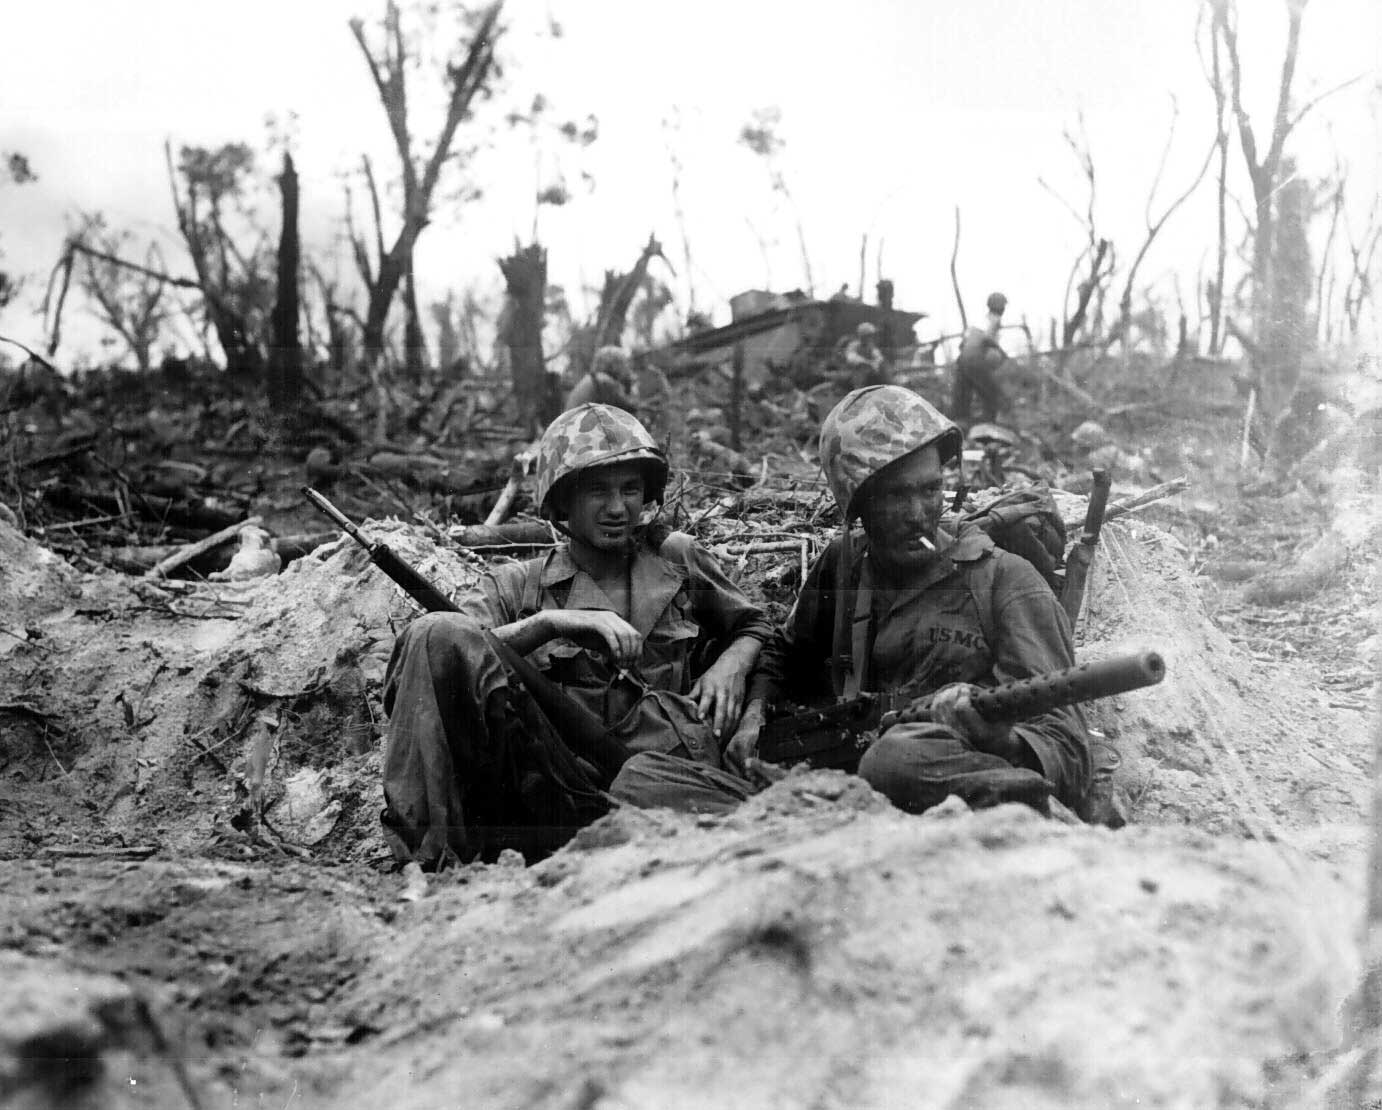 Two American Marines, Douglas Lightheart and Gerald Thursby, resting during Battle of Peleliu in the Palau Islands, 15 Sep 1944